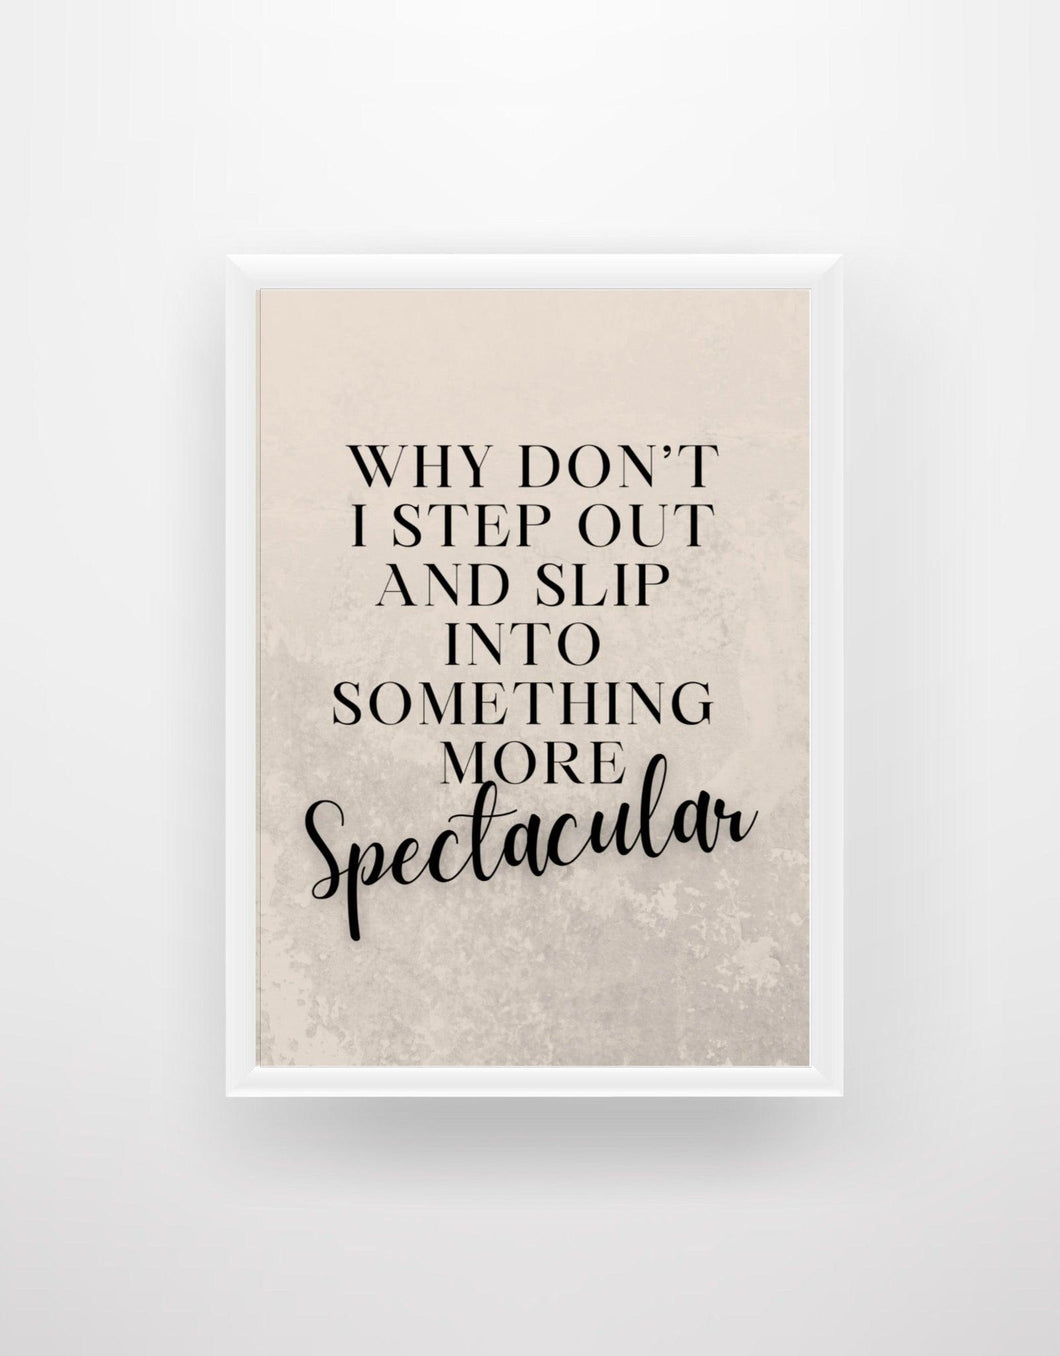 Why Don't I Step Out And Slip Into Something More Spectacular - Quote Print - Chic Prints